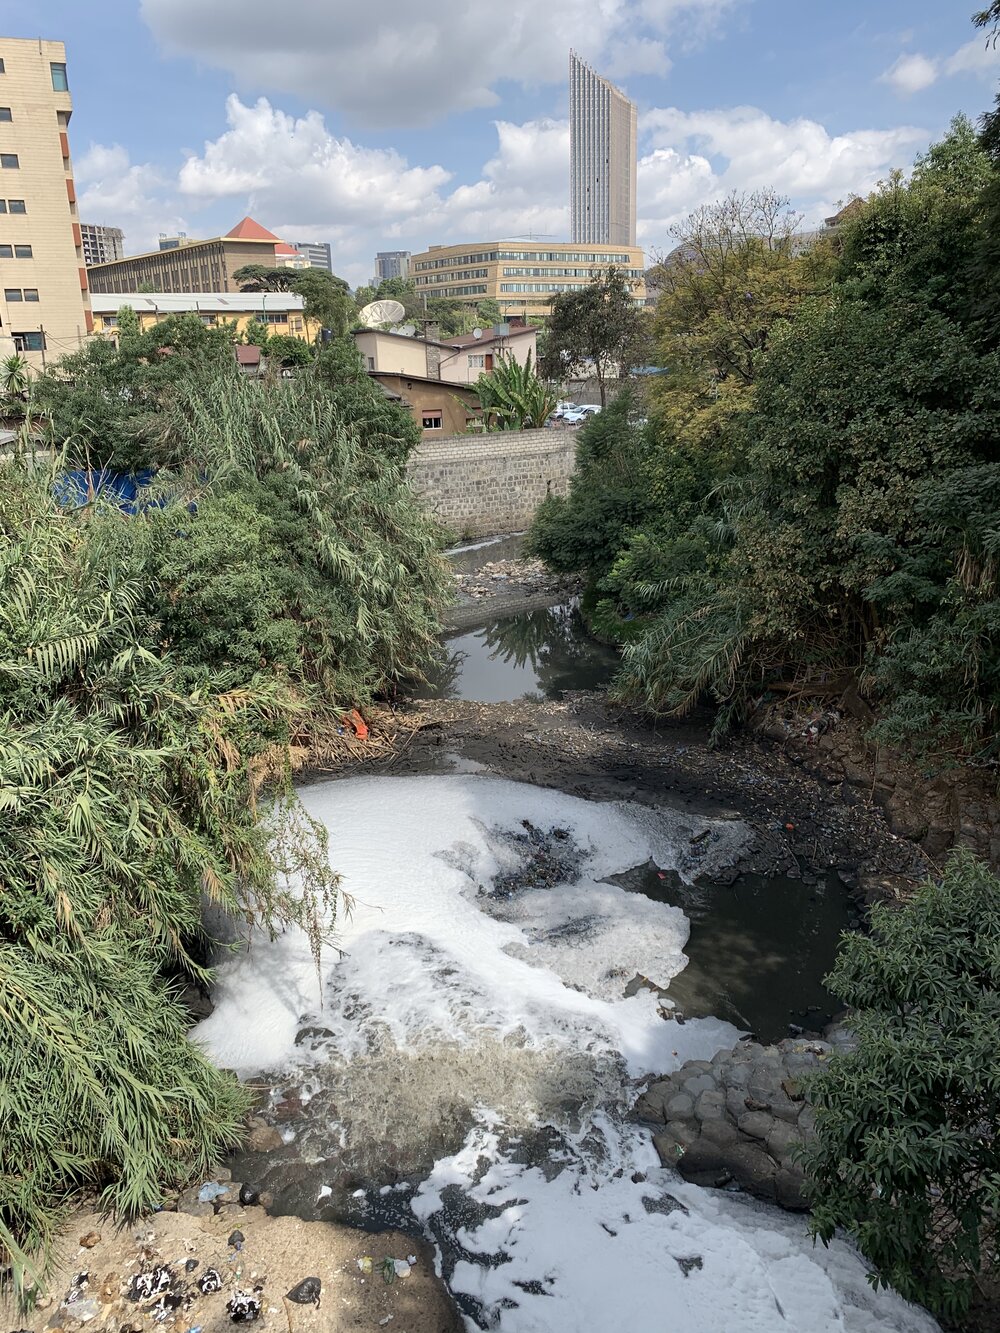 The Akaki River tributary running alongside the AU campus (and former prison sometimes called Akaki Prison). Smells like it sounds.